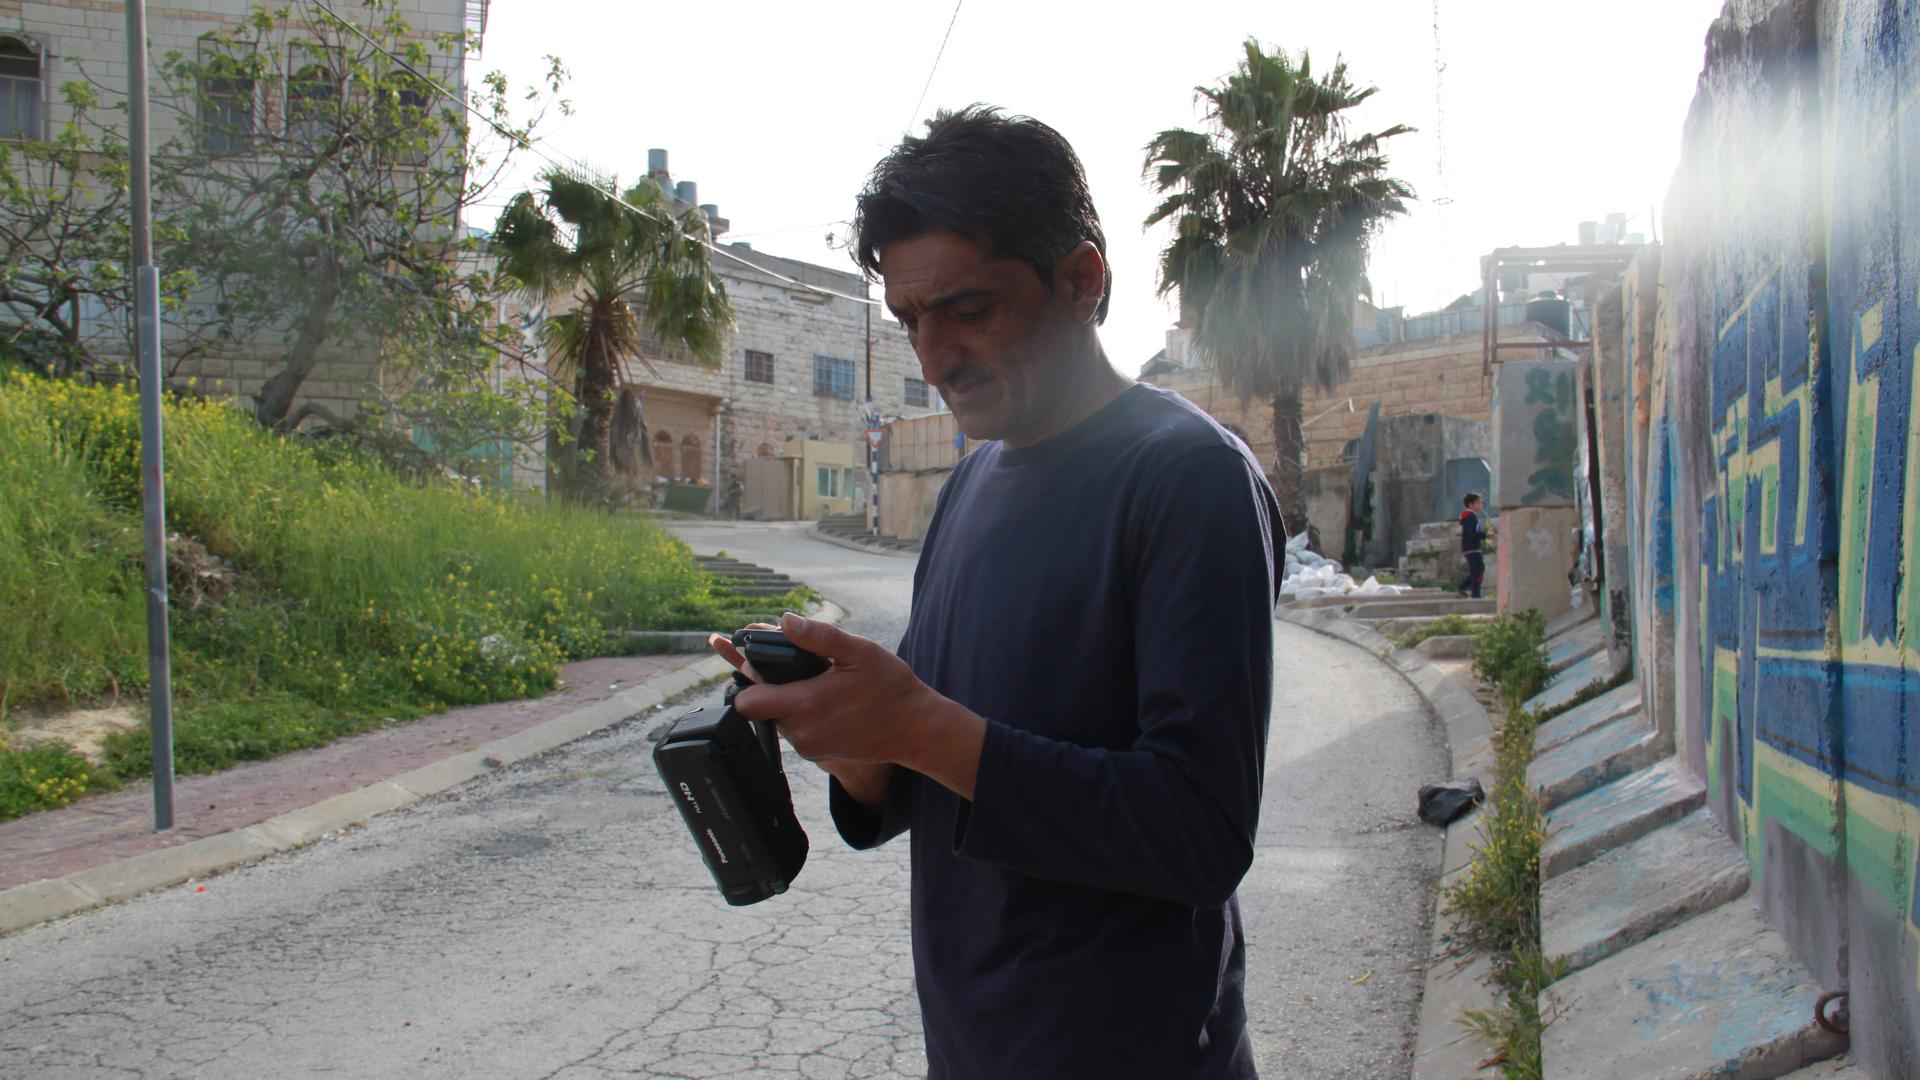 Emad Abu Shamsiyeh who filmed the shooting, standing with his camera at the site in Hebron where it happened. Since his video was posted online, he's been threatened and attacked.